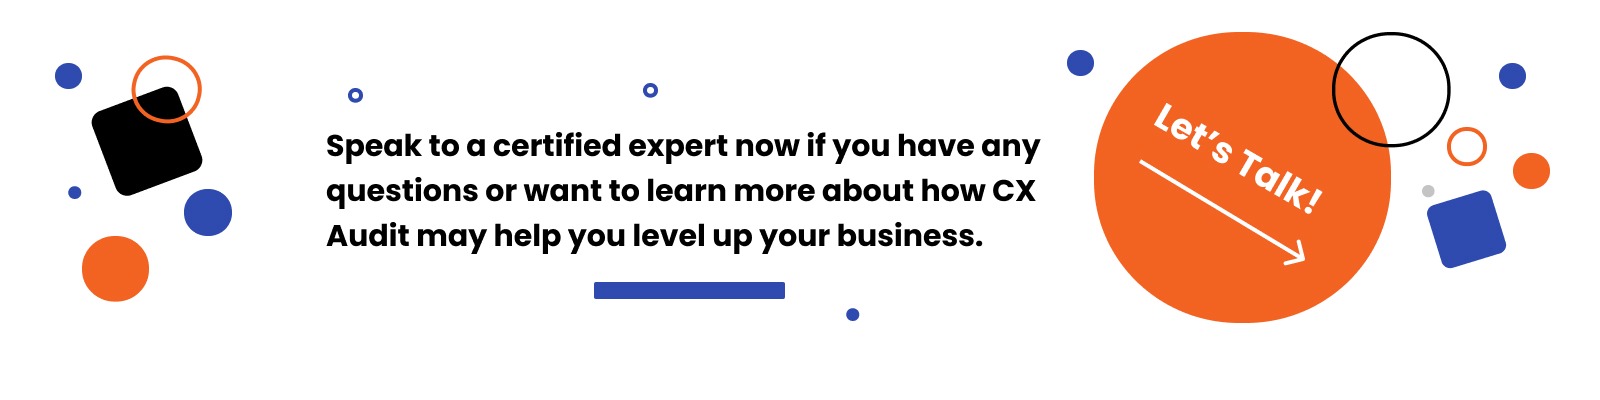 Speak to a Certified Expert now if you have any questions or want to learn more about how CX Audit may help you level up your business.